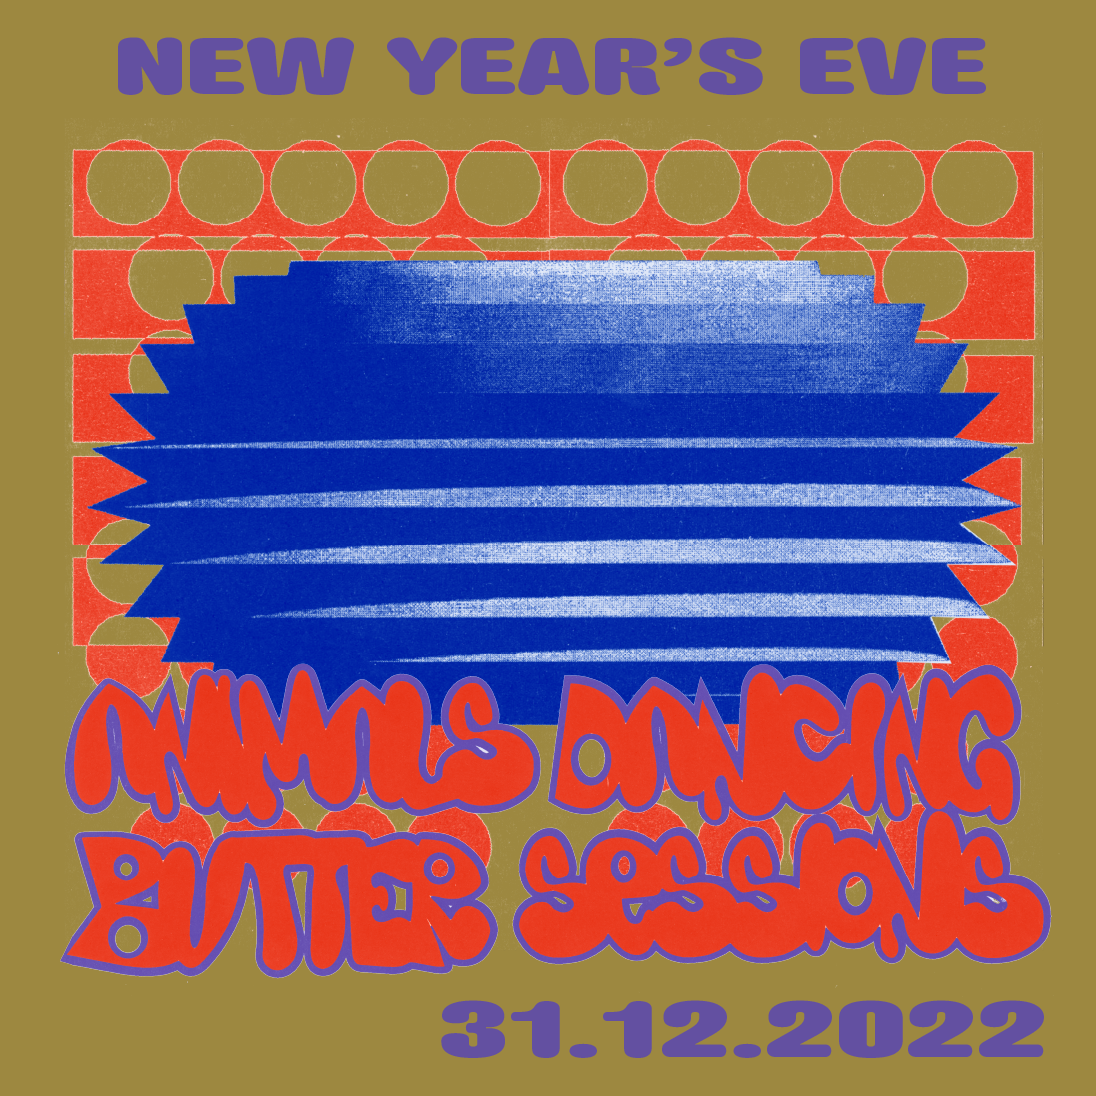 News: AD x BSR: New Years Eve